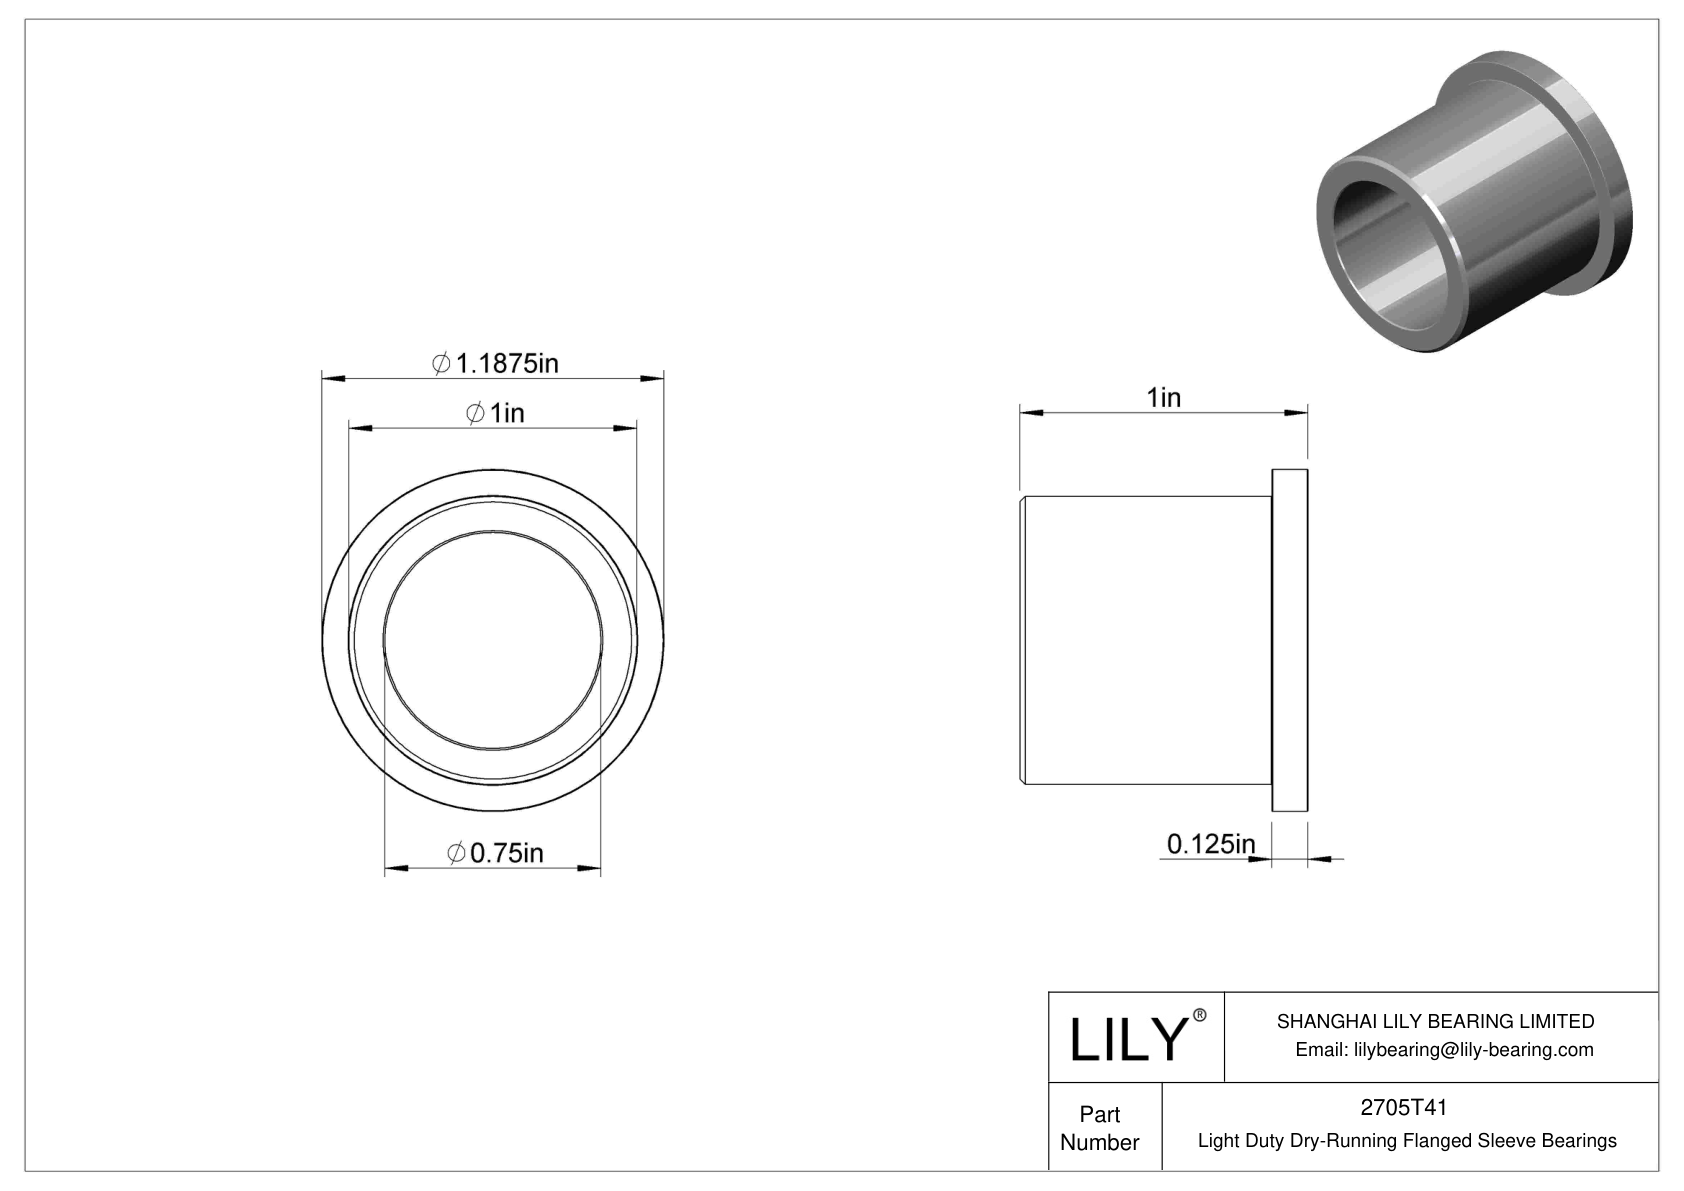 CHAFTEB Light Duty Dry-Running Flanged Sleeve Bearings cad drawing